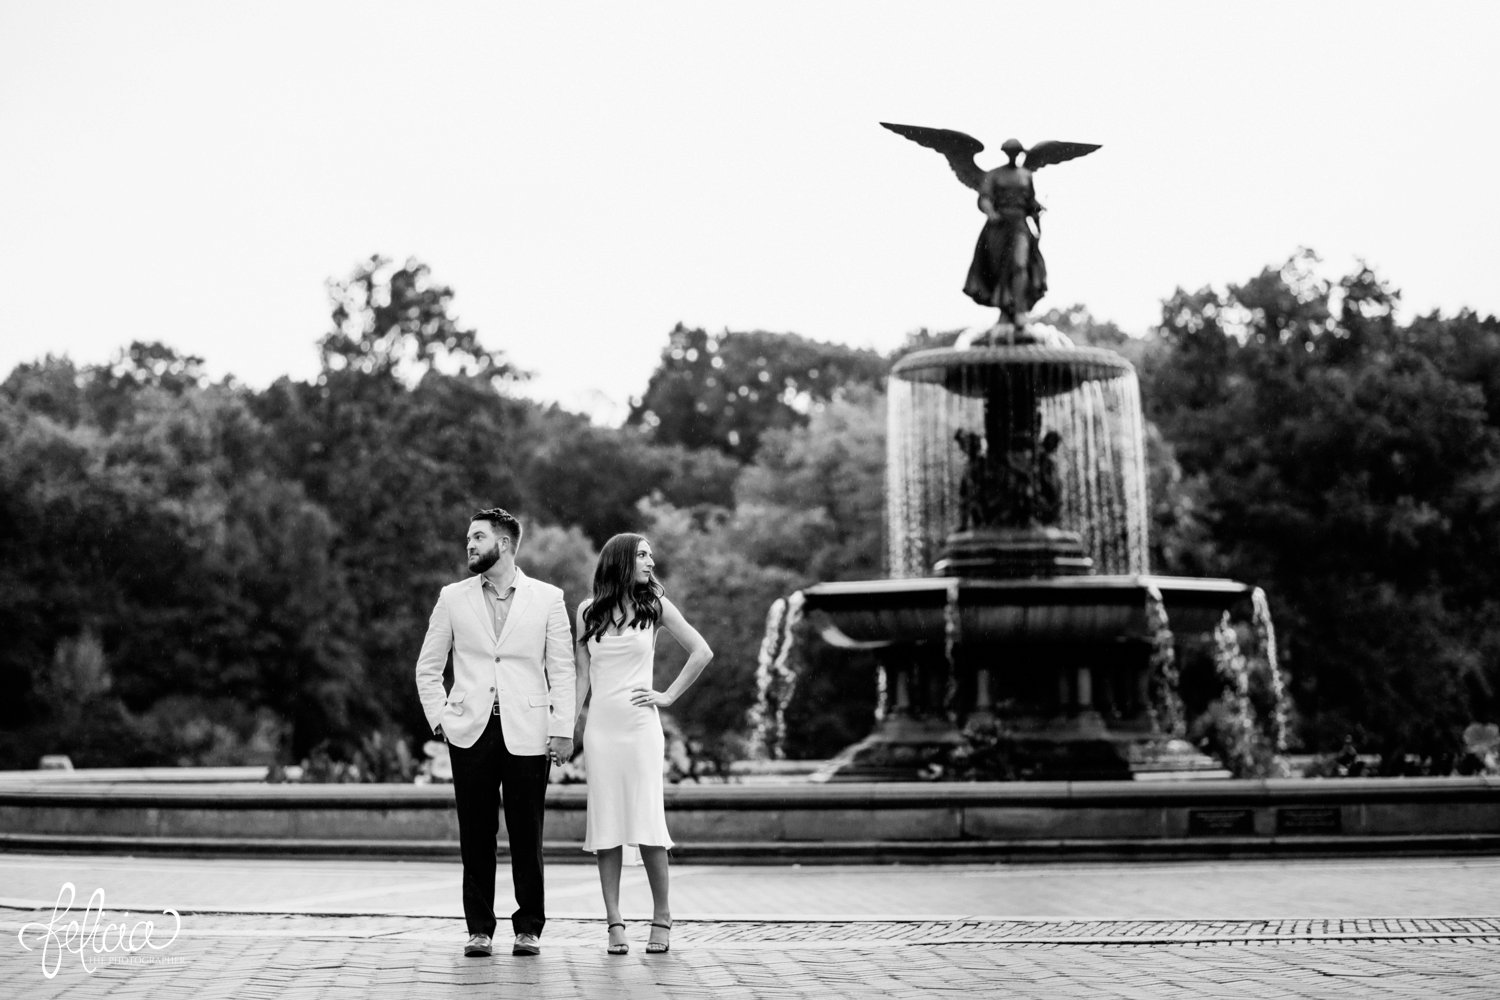 images by feliciathephotographer.com | destination wedding photographer | elopement | new york city | second look | bethesda | central park | detailed ceiling | architecture | romantic | classic | cowl neck dress | fountain | black and white | 